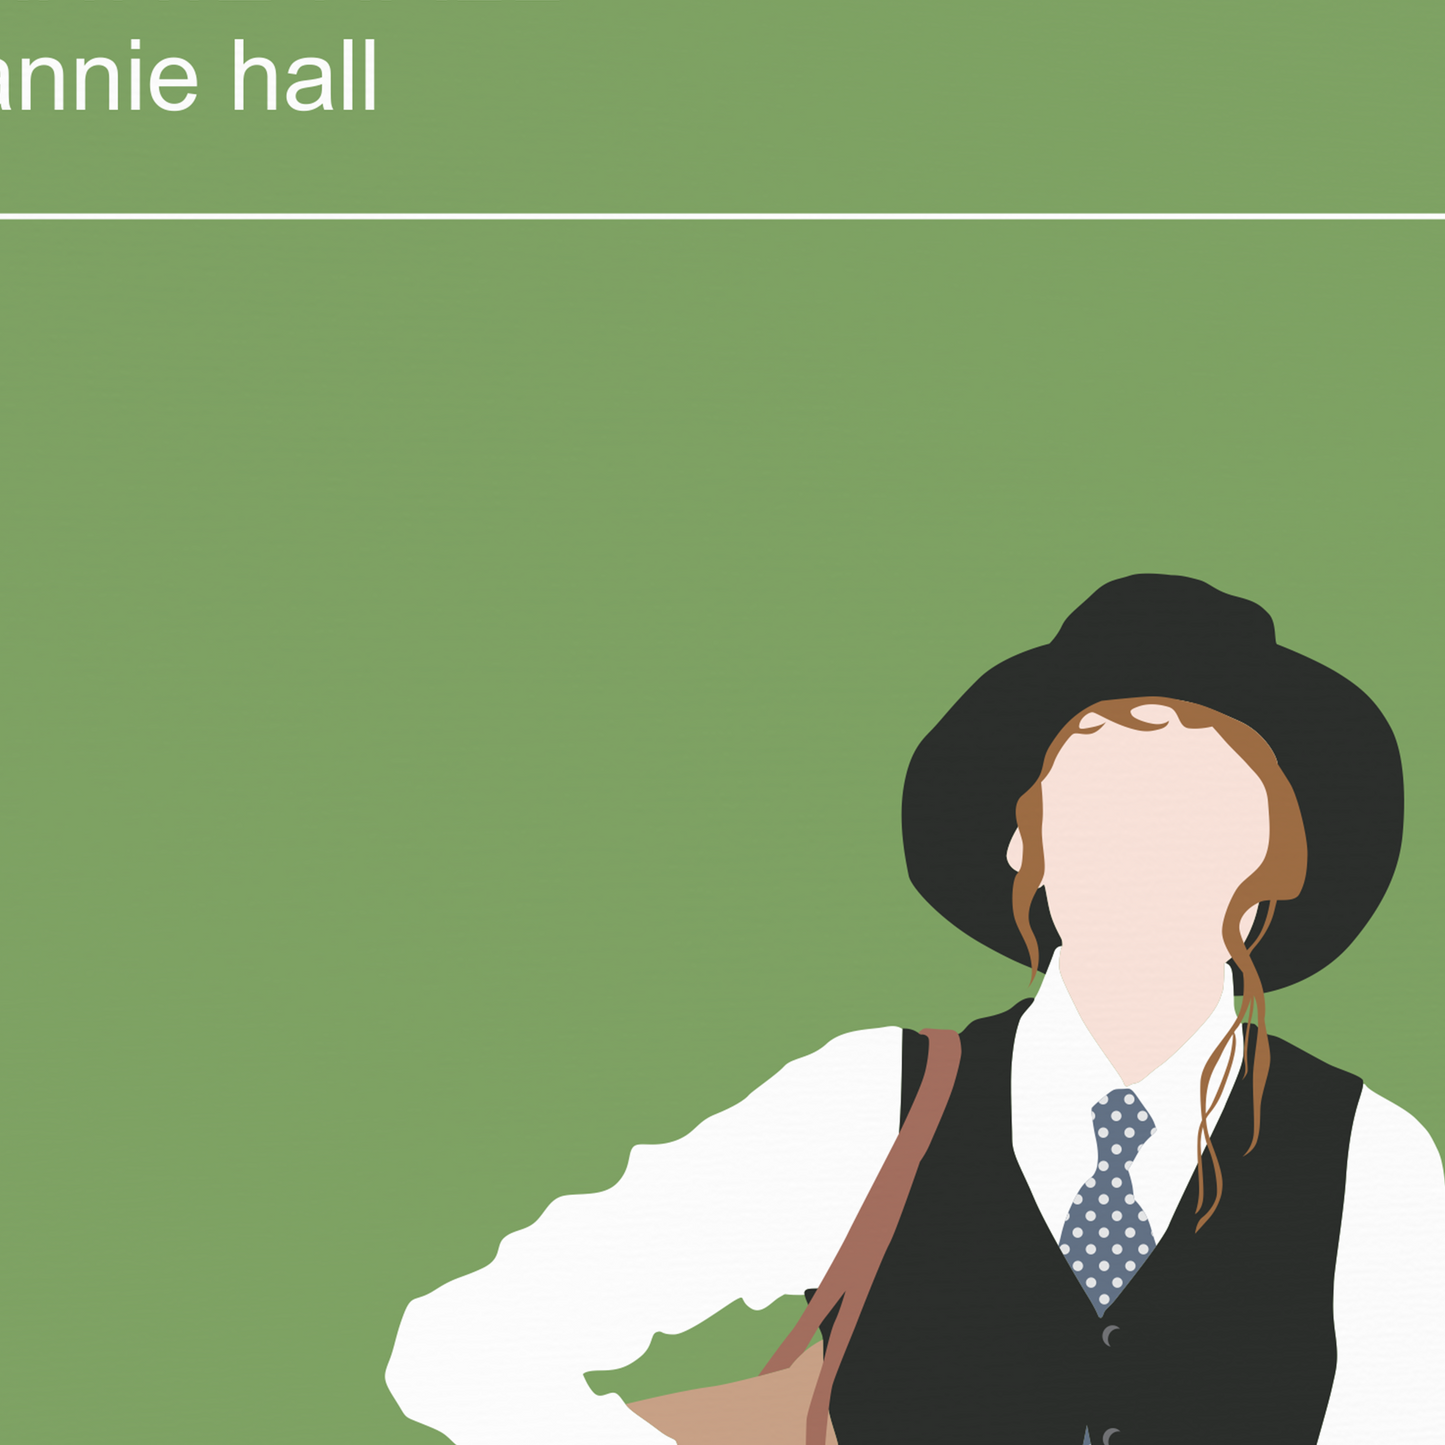 New Poster! Annie Hall movie poster, Diane Keaton Style, Woody Allen